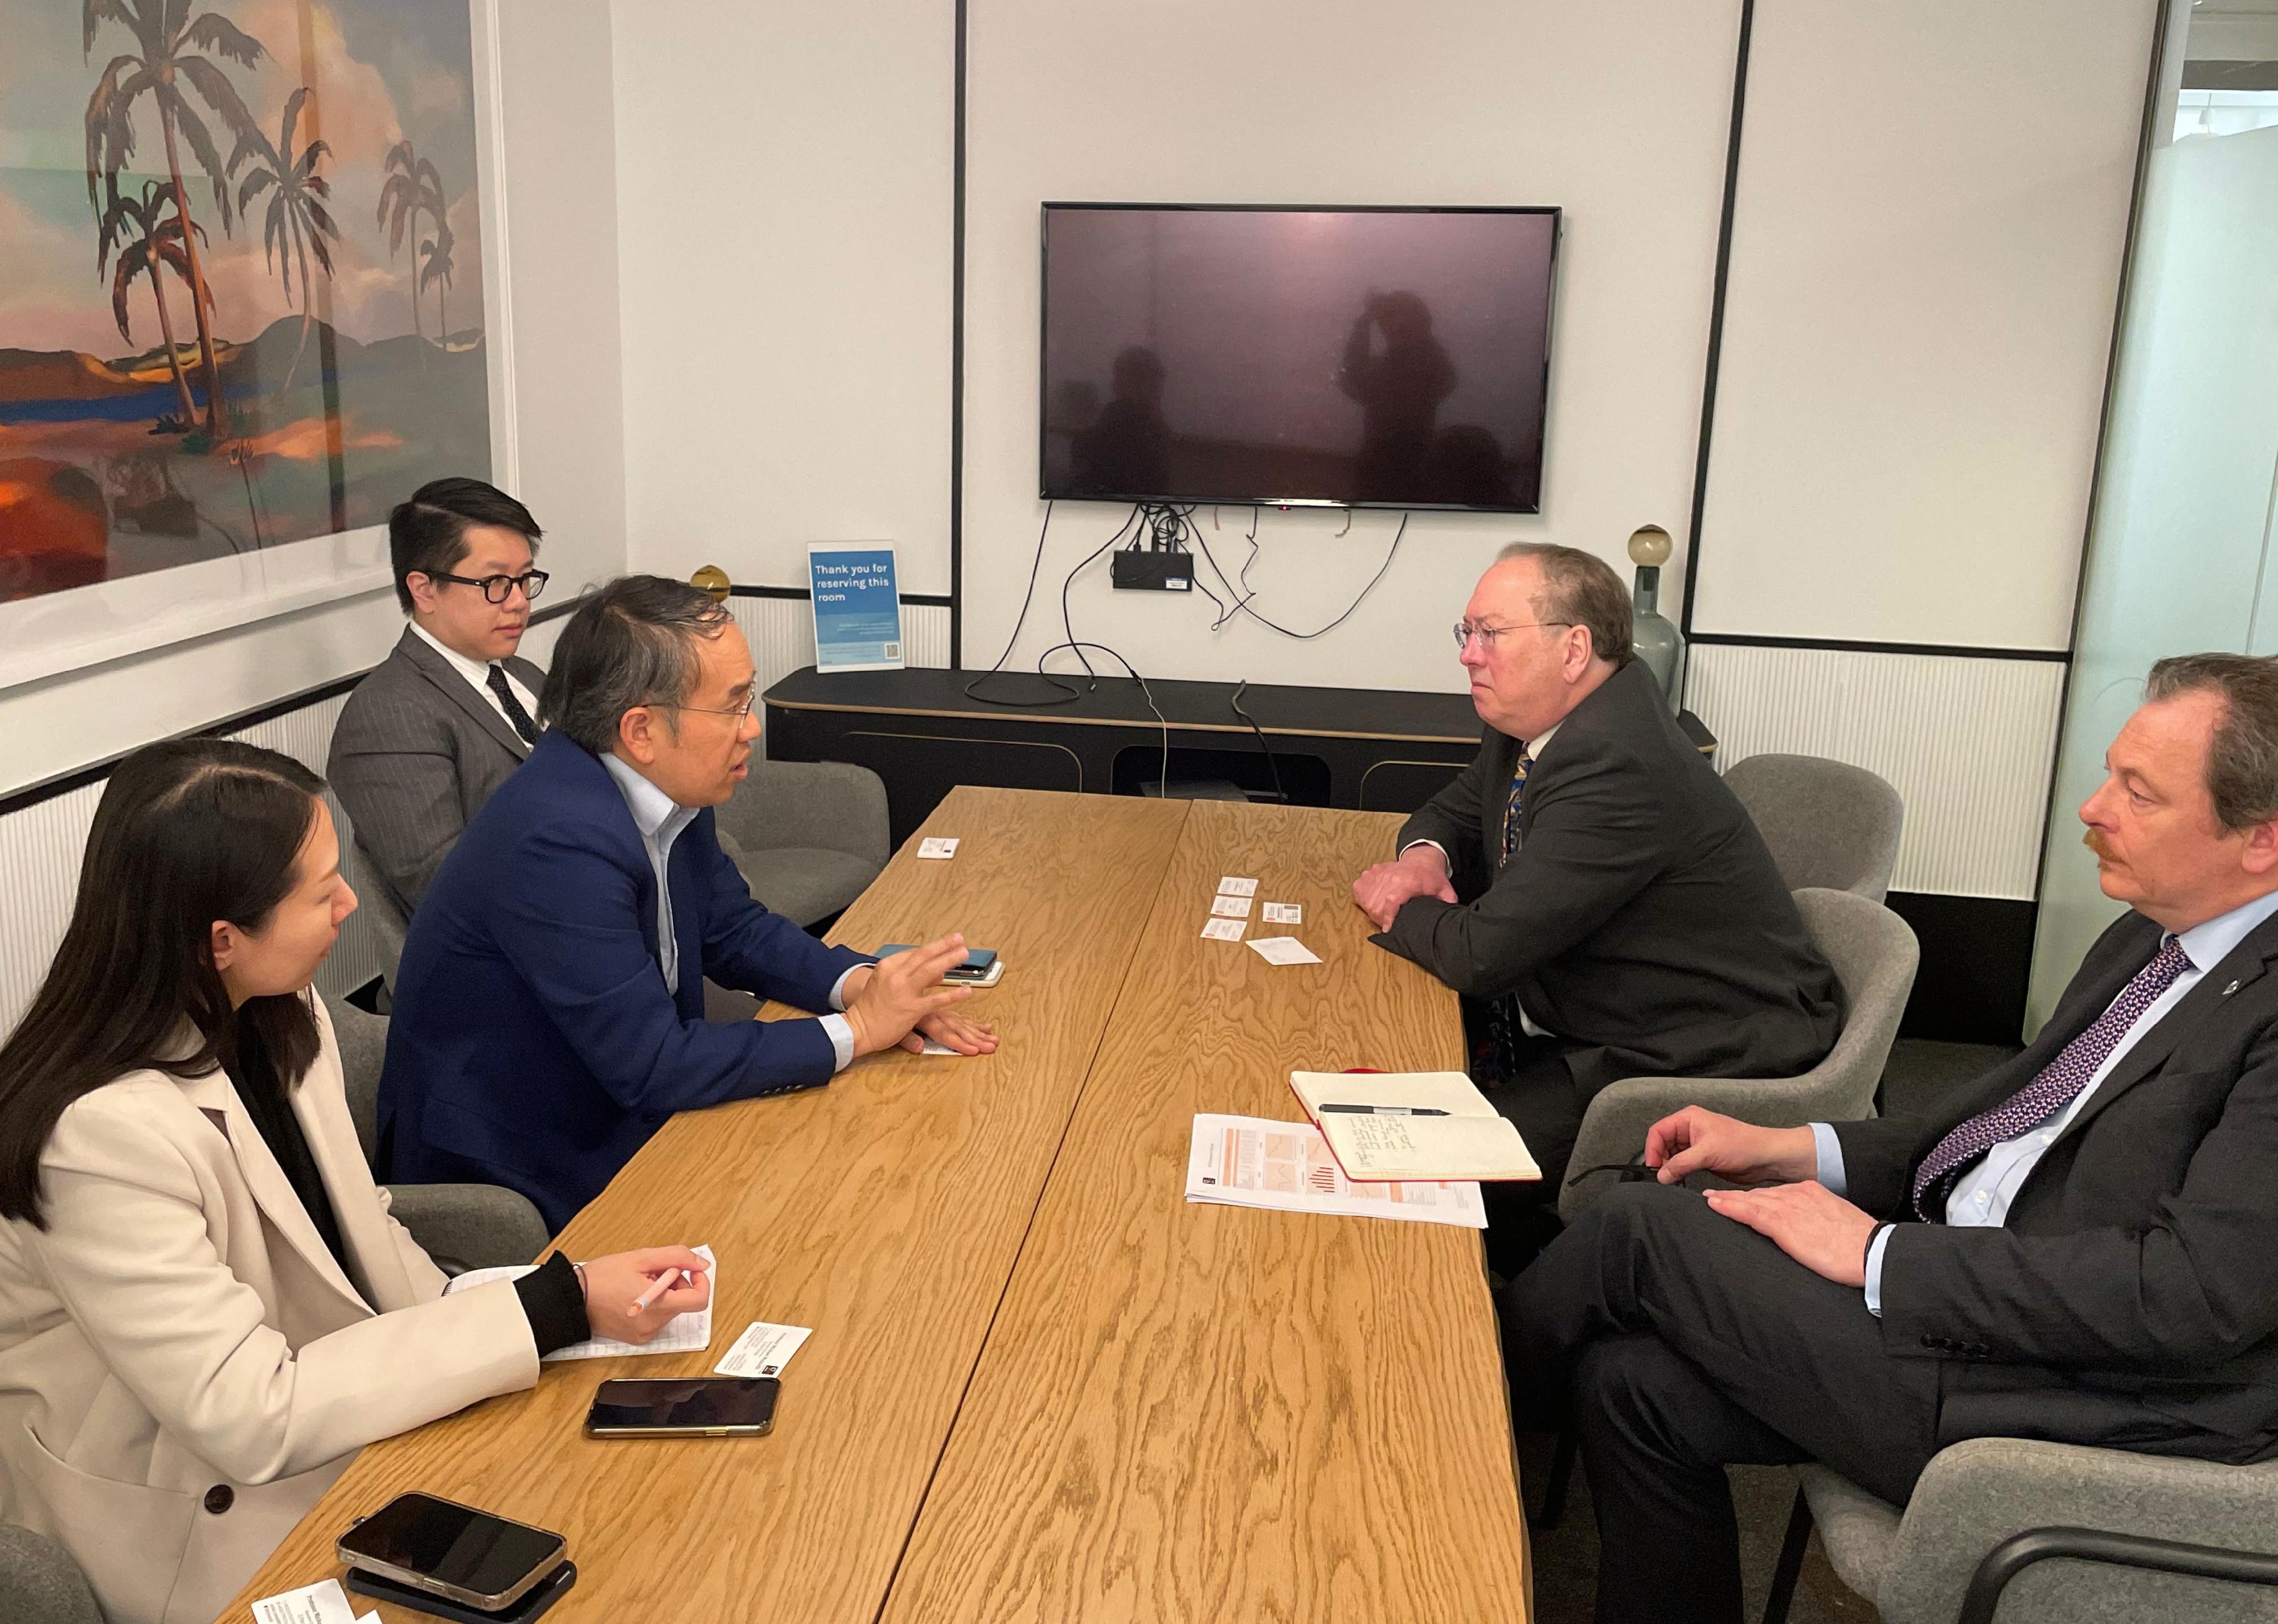 The Secretary for Financial Services and the Treasury, Mr Christopher Hui (second left), yesterday (April 17, London time) met with the Chairman of Z/Yen Group, Professor Michael Mainelli (second right), and the Chief Executive Officer of Z/Yen Group, Mr Mike Wardle (first right) in London, the UK.